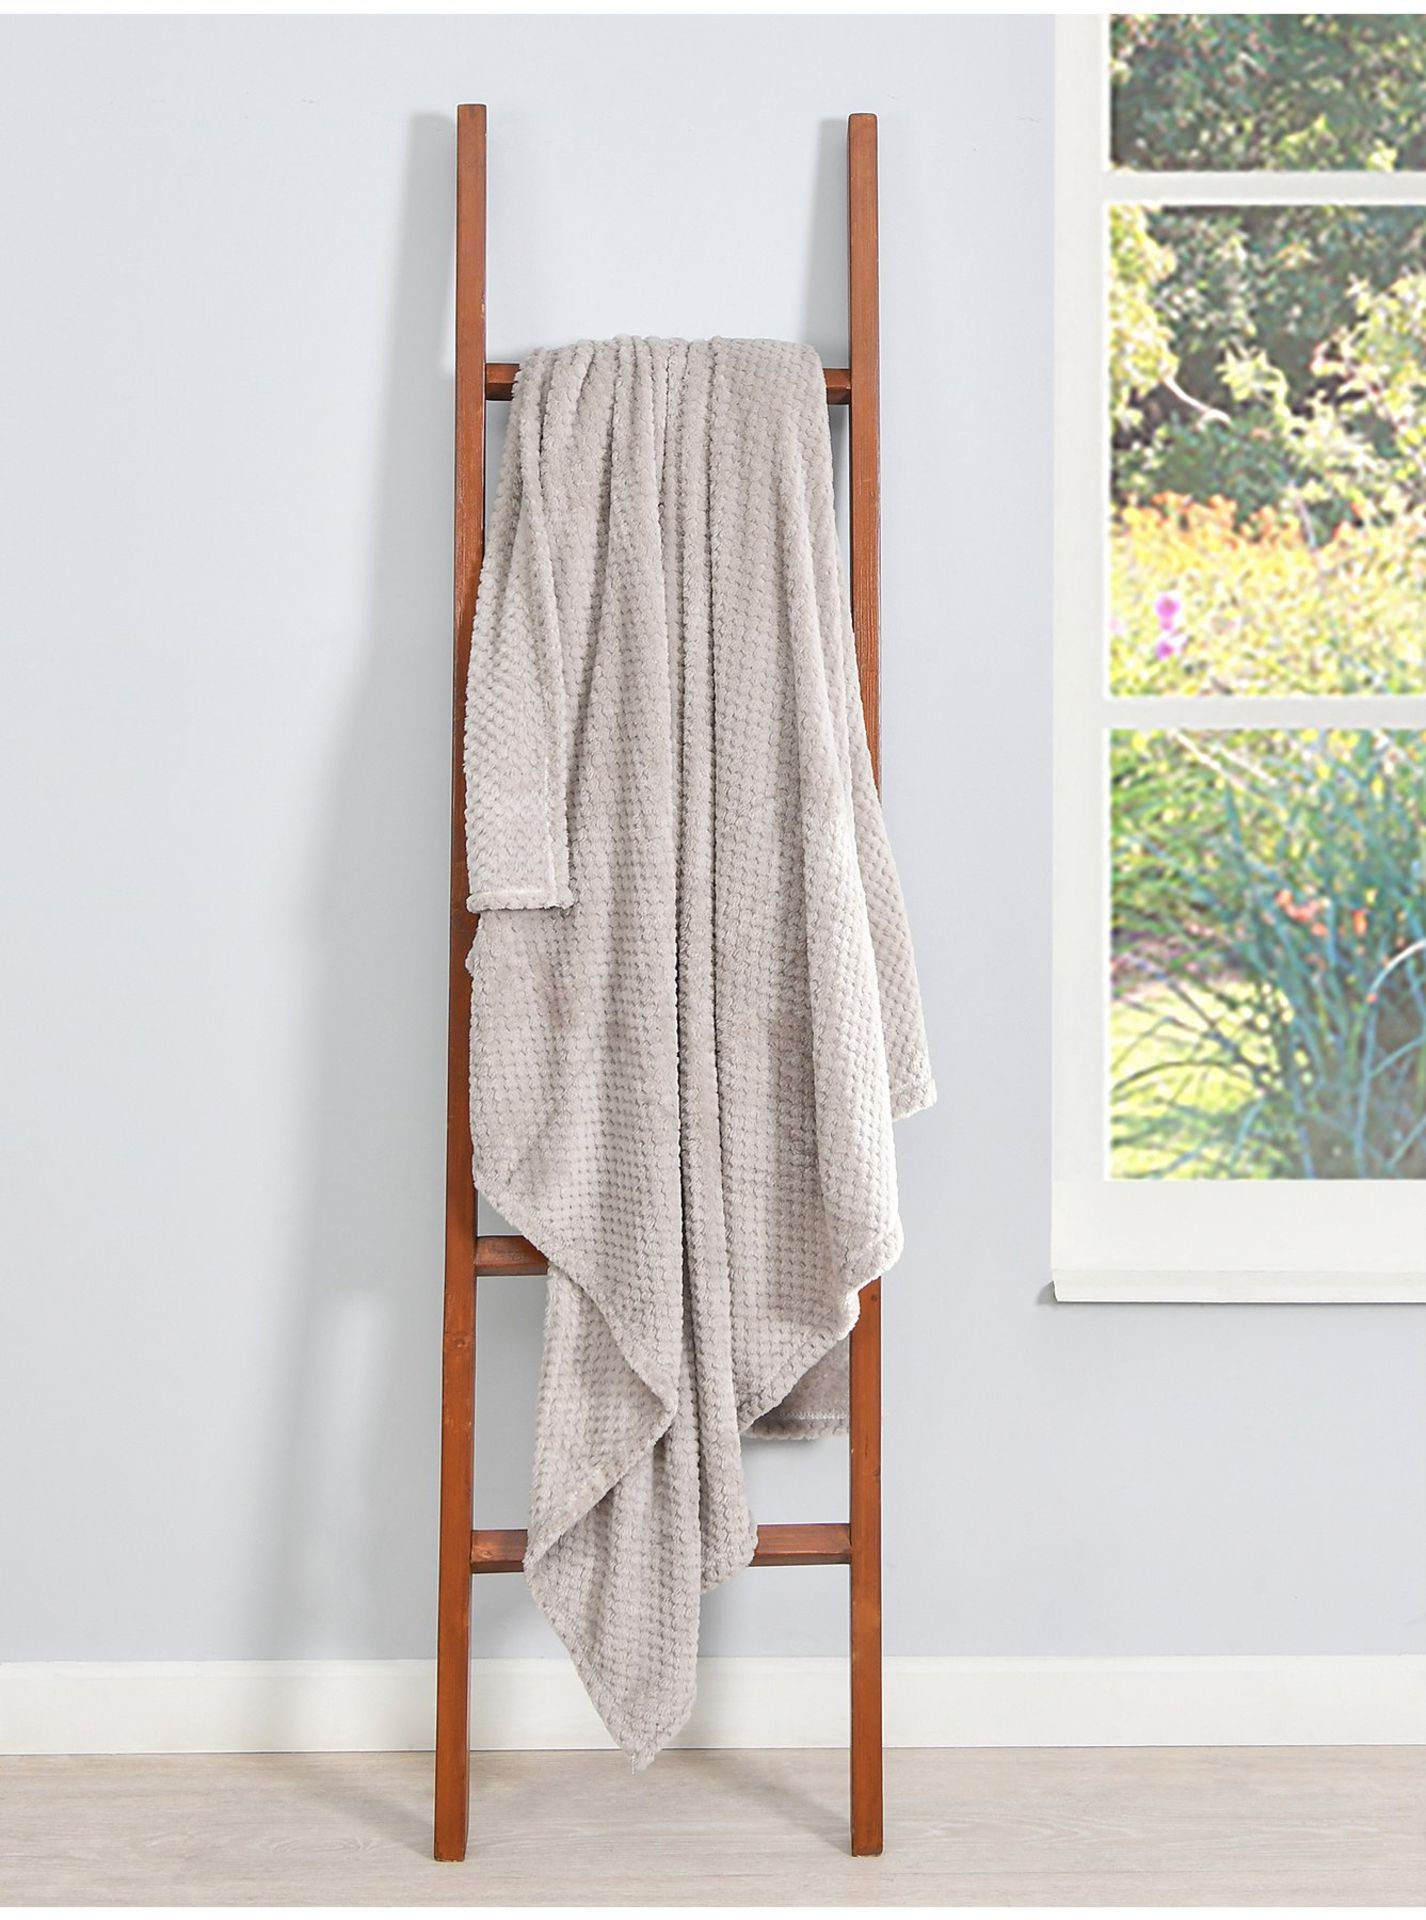 16x NEW & PACKAGED SLEEPDOWN Cosy Collection Soft Touch Waffle Fleece Throw 130 x 160cm - NATURAL. - Image 2 of 7